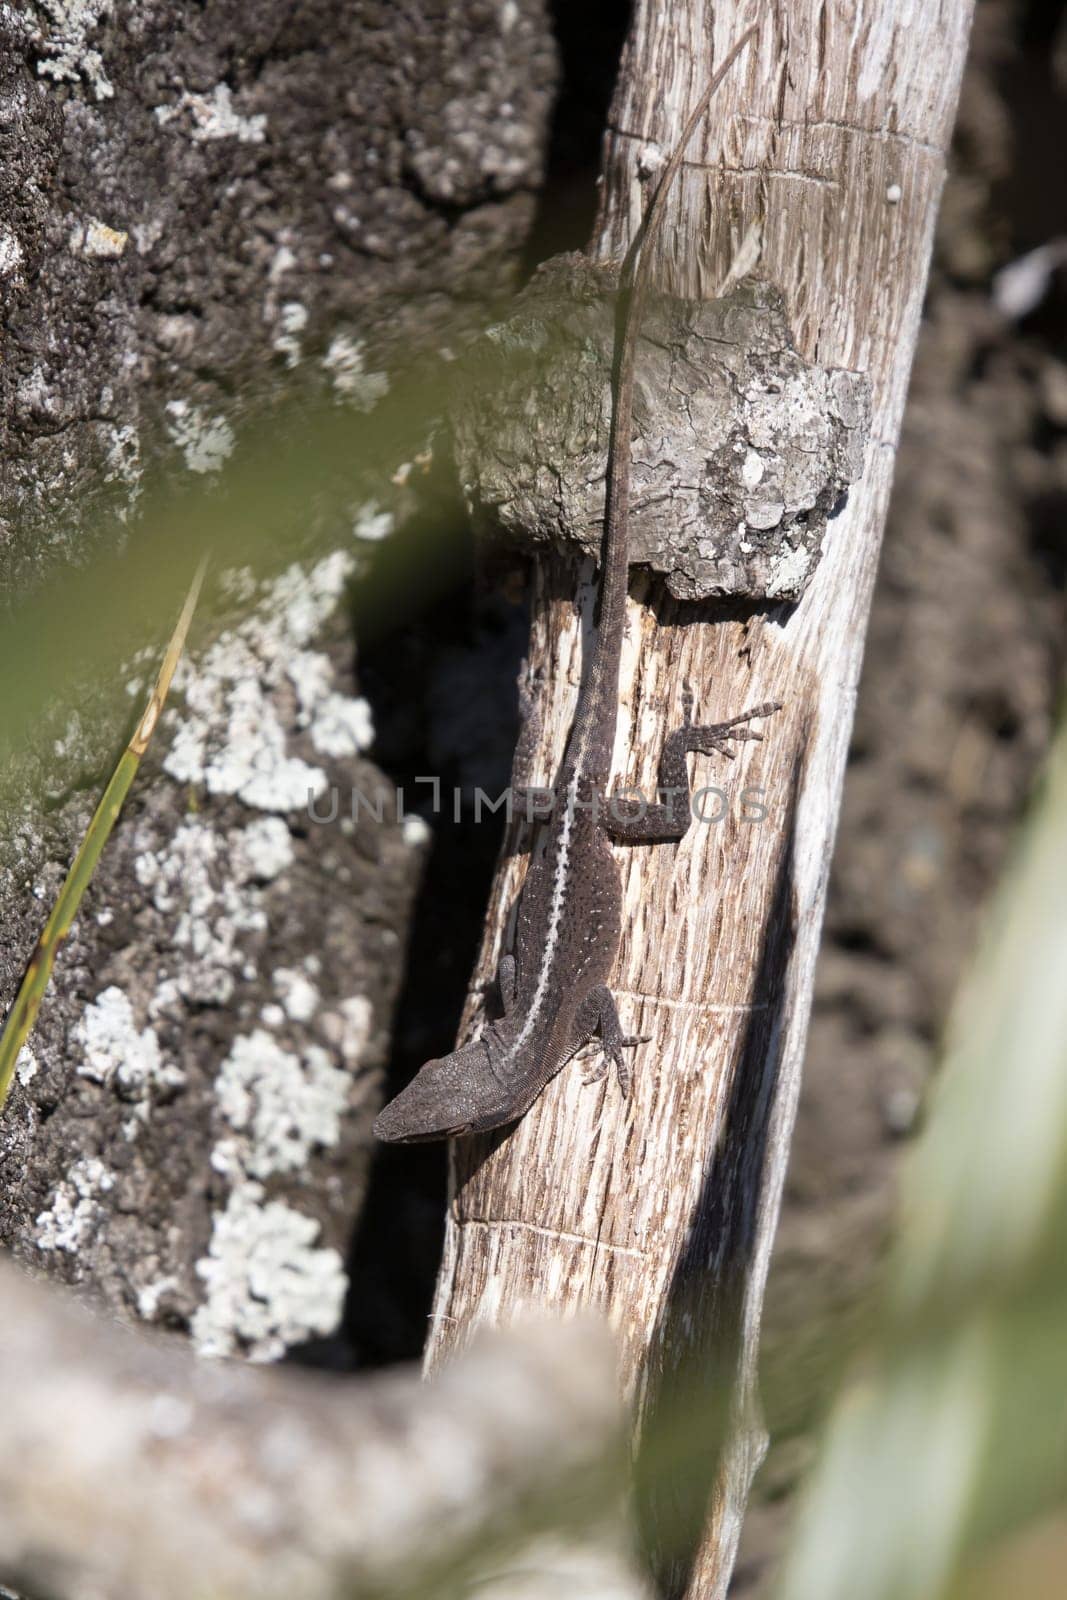 Brown-phase green anole (Anolis carolinensis) turning its head to look around as the rest of its body is completely still on a tree behind out of focus grass